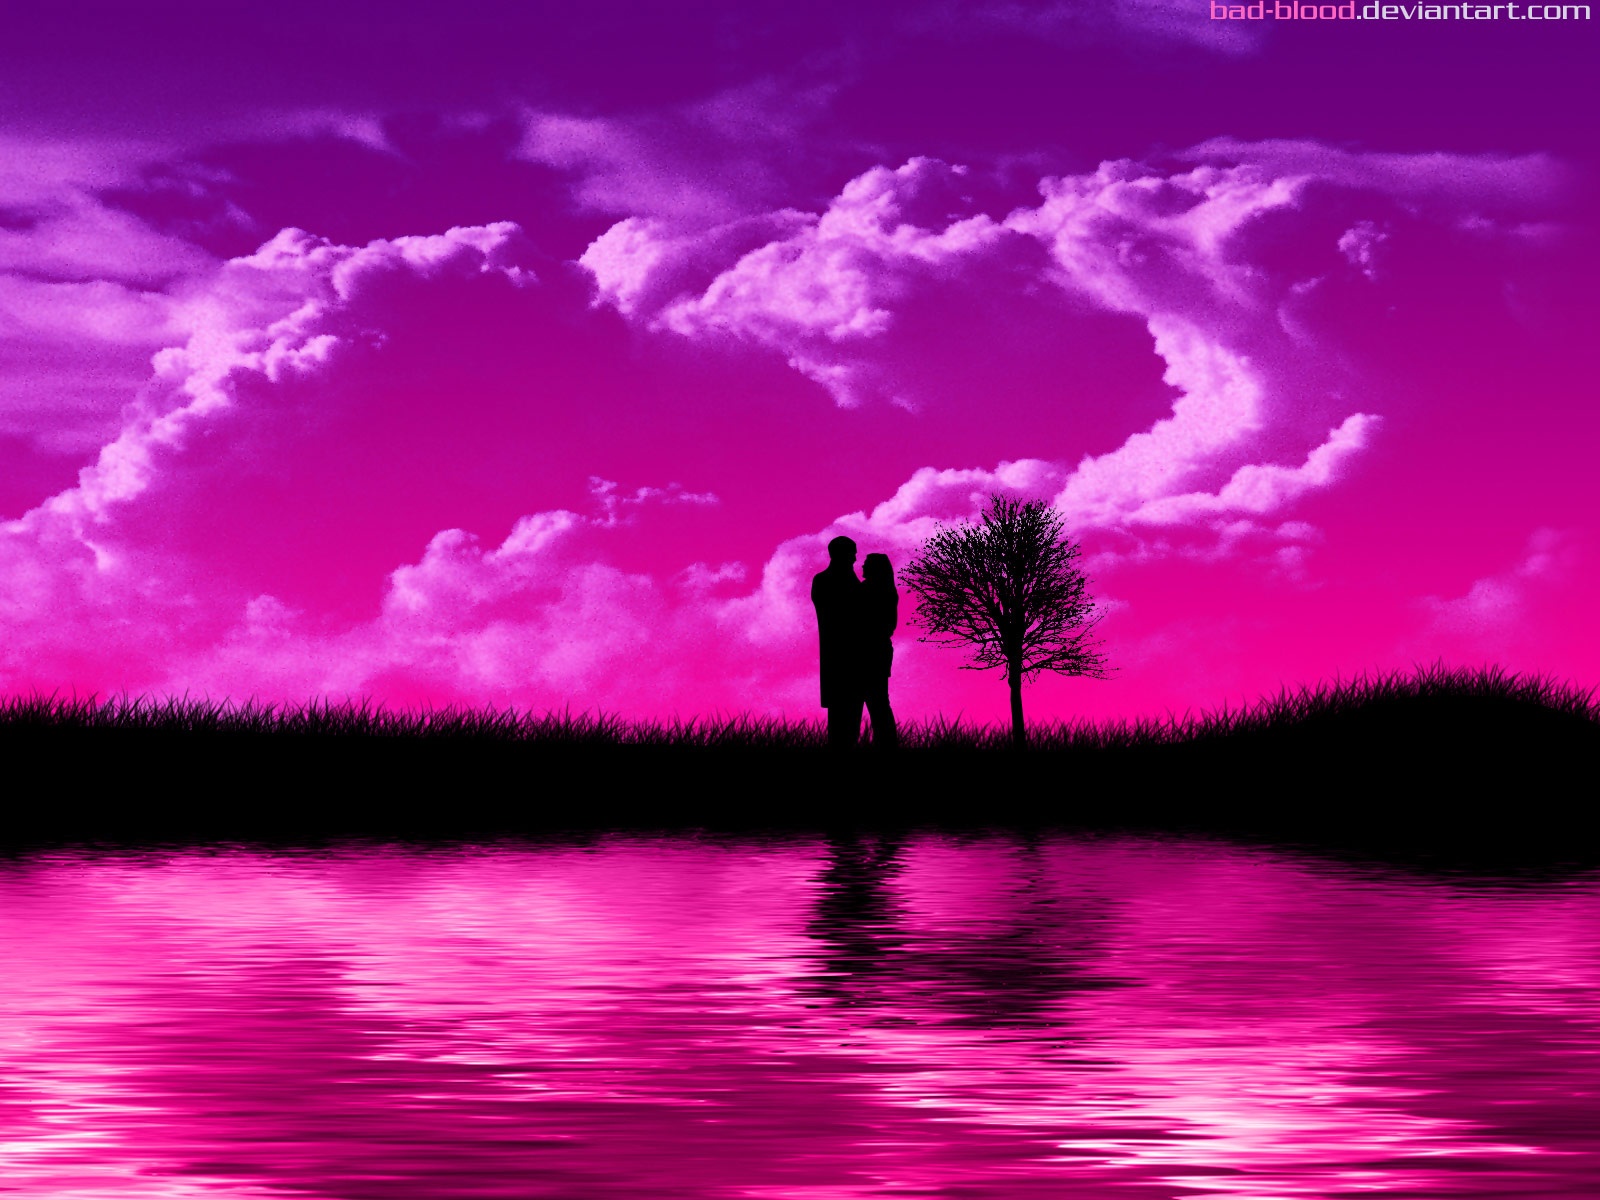 Wallpaper Backgrounds Romantic Love Wallpapers for